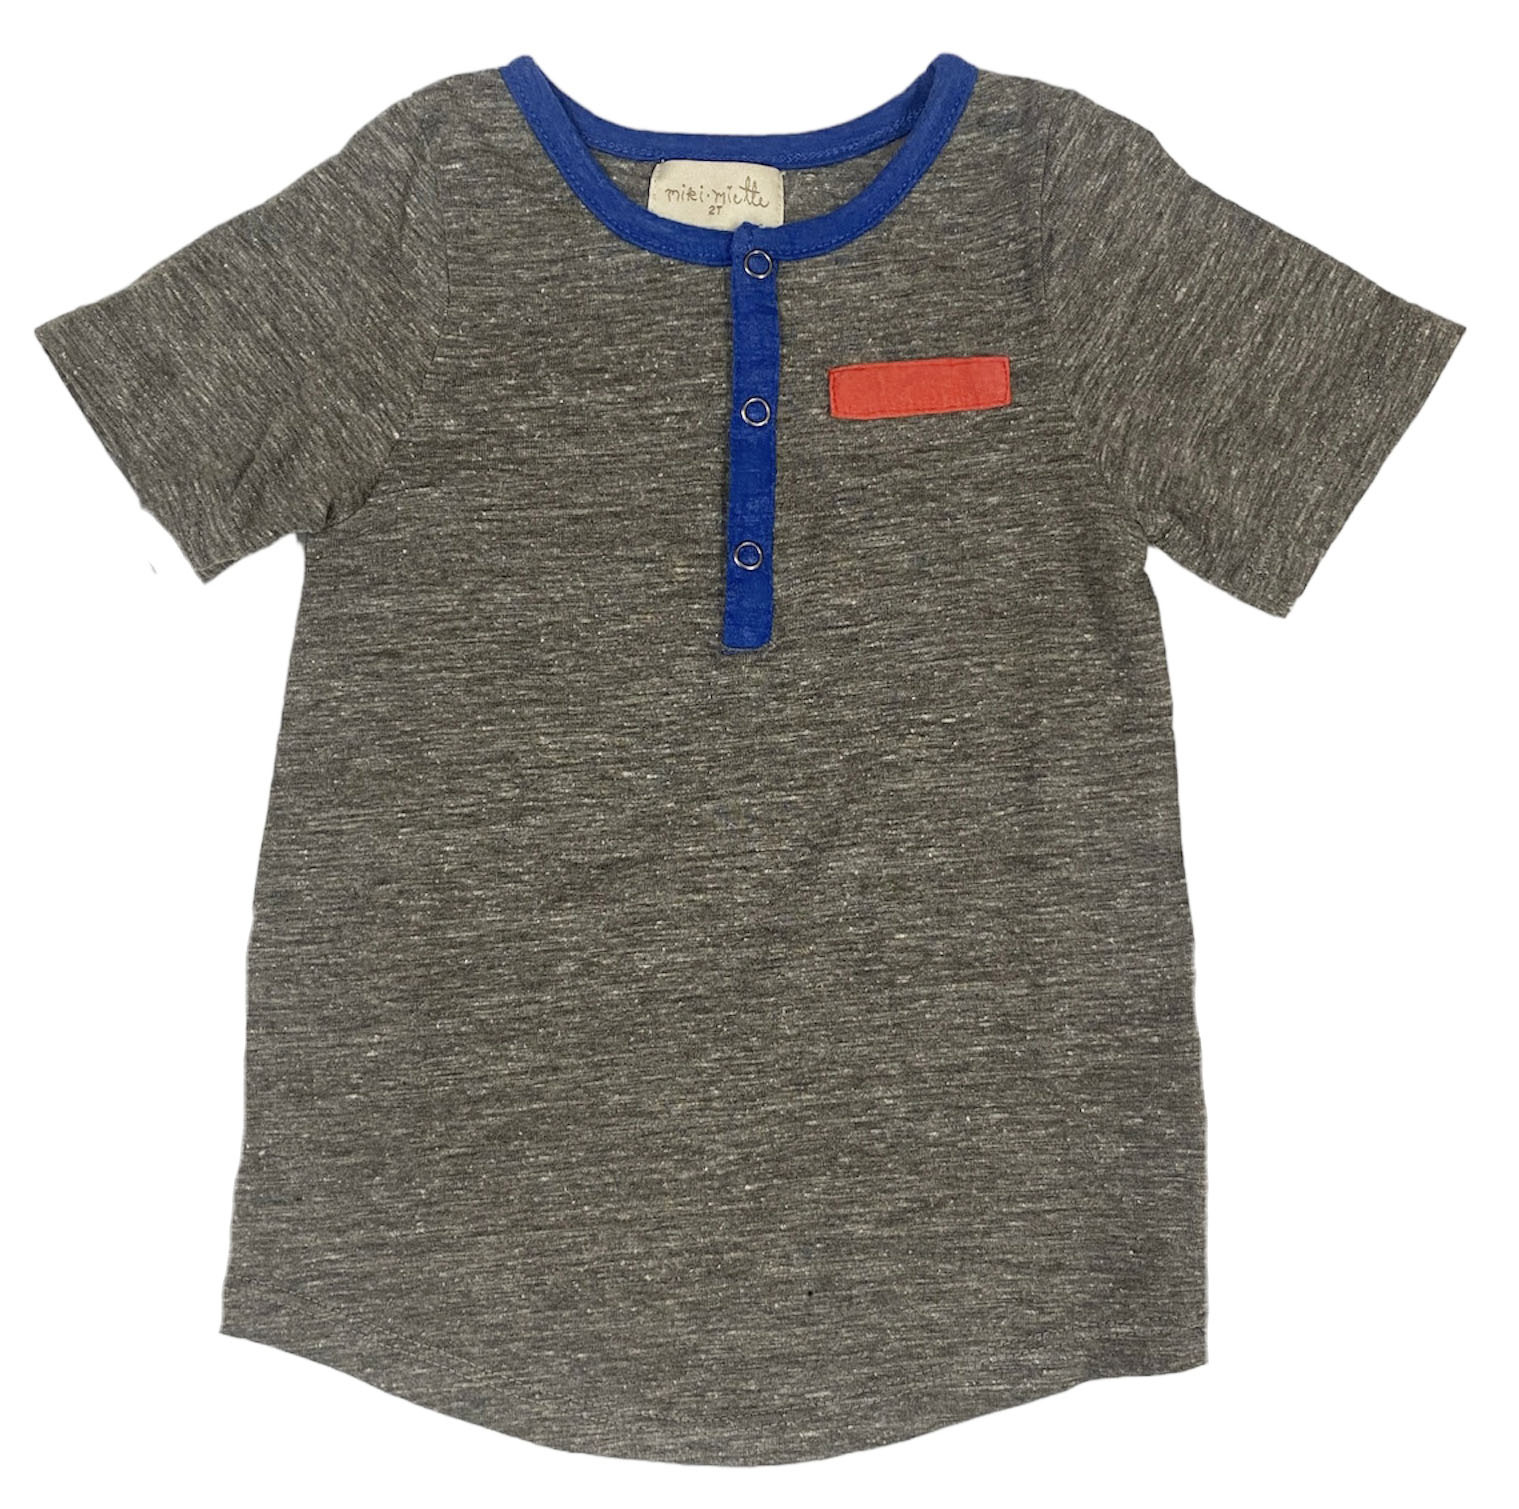 Miki Miette H Grey w/Blue/Red SS Henley Infant